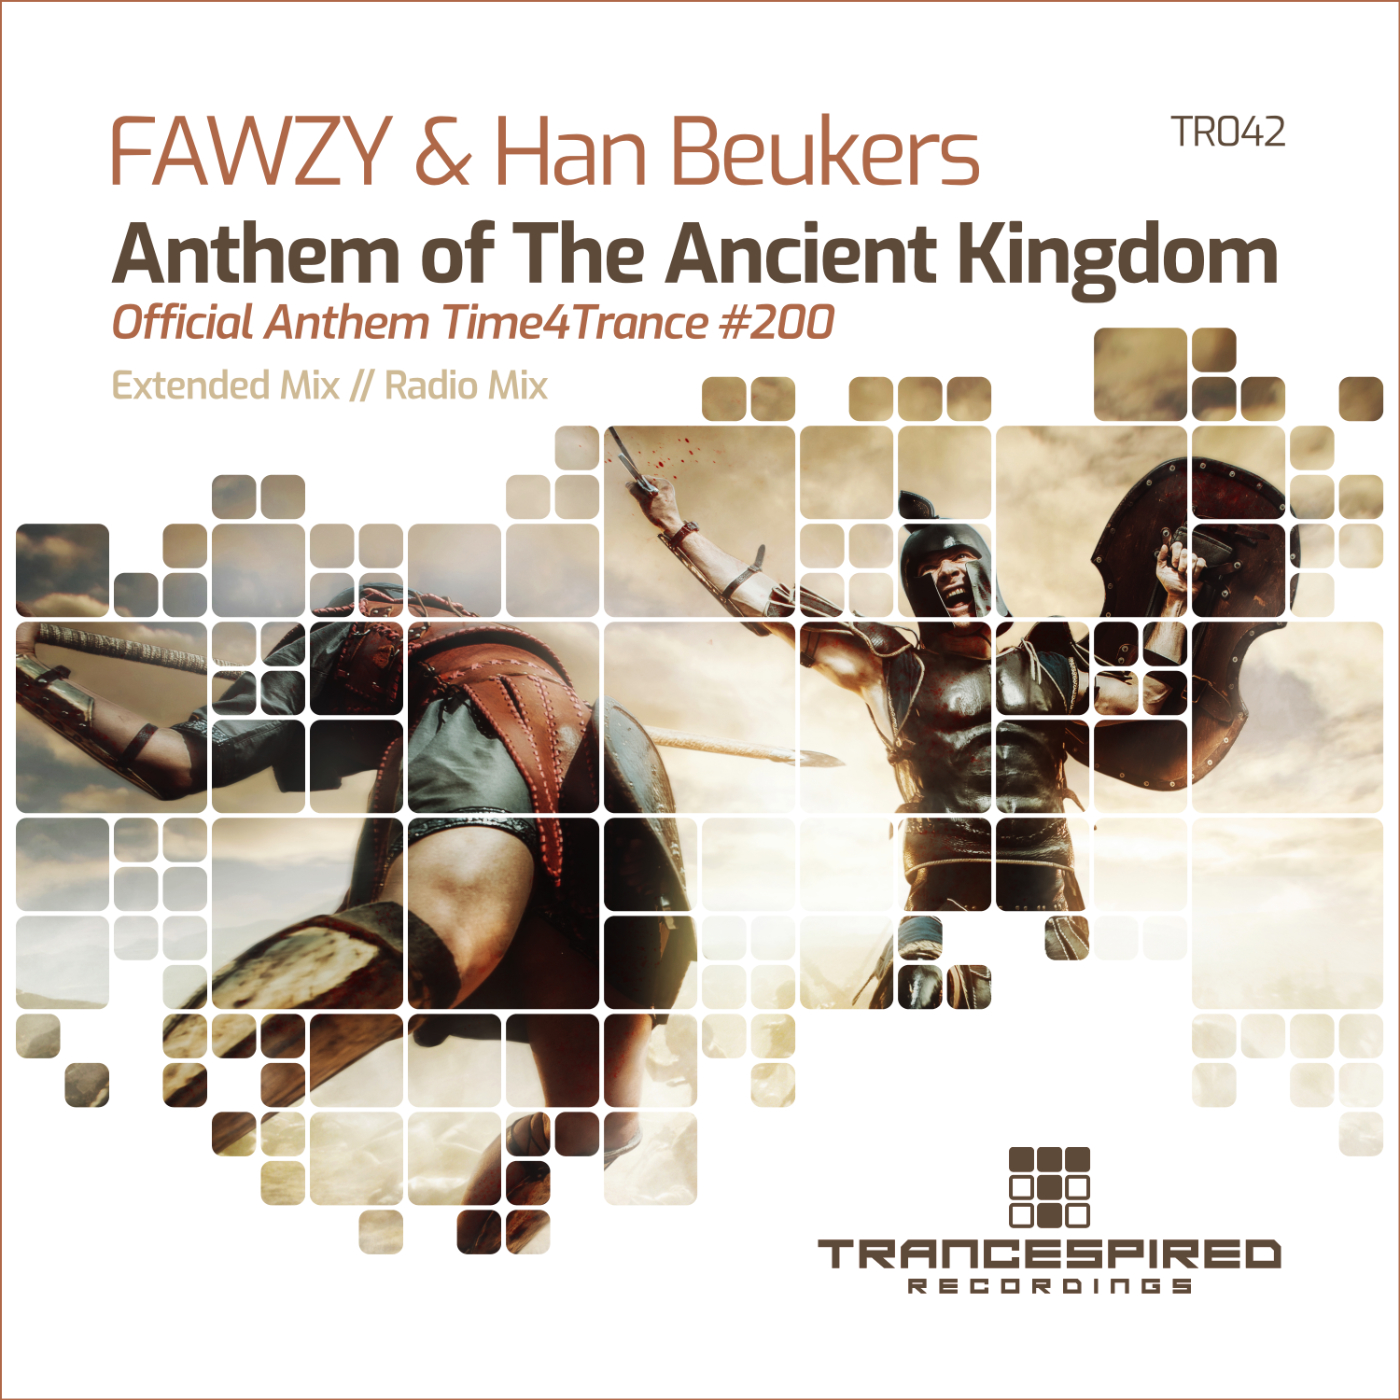 FAWZY and Han Beukers presents Anthem Of The Ancient Kingdom on Trancespired Recordings